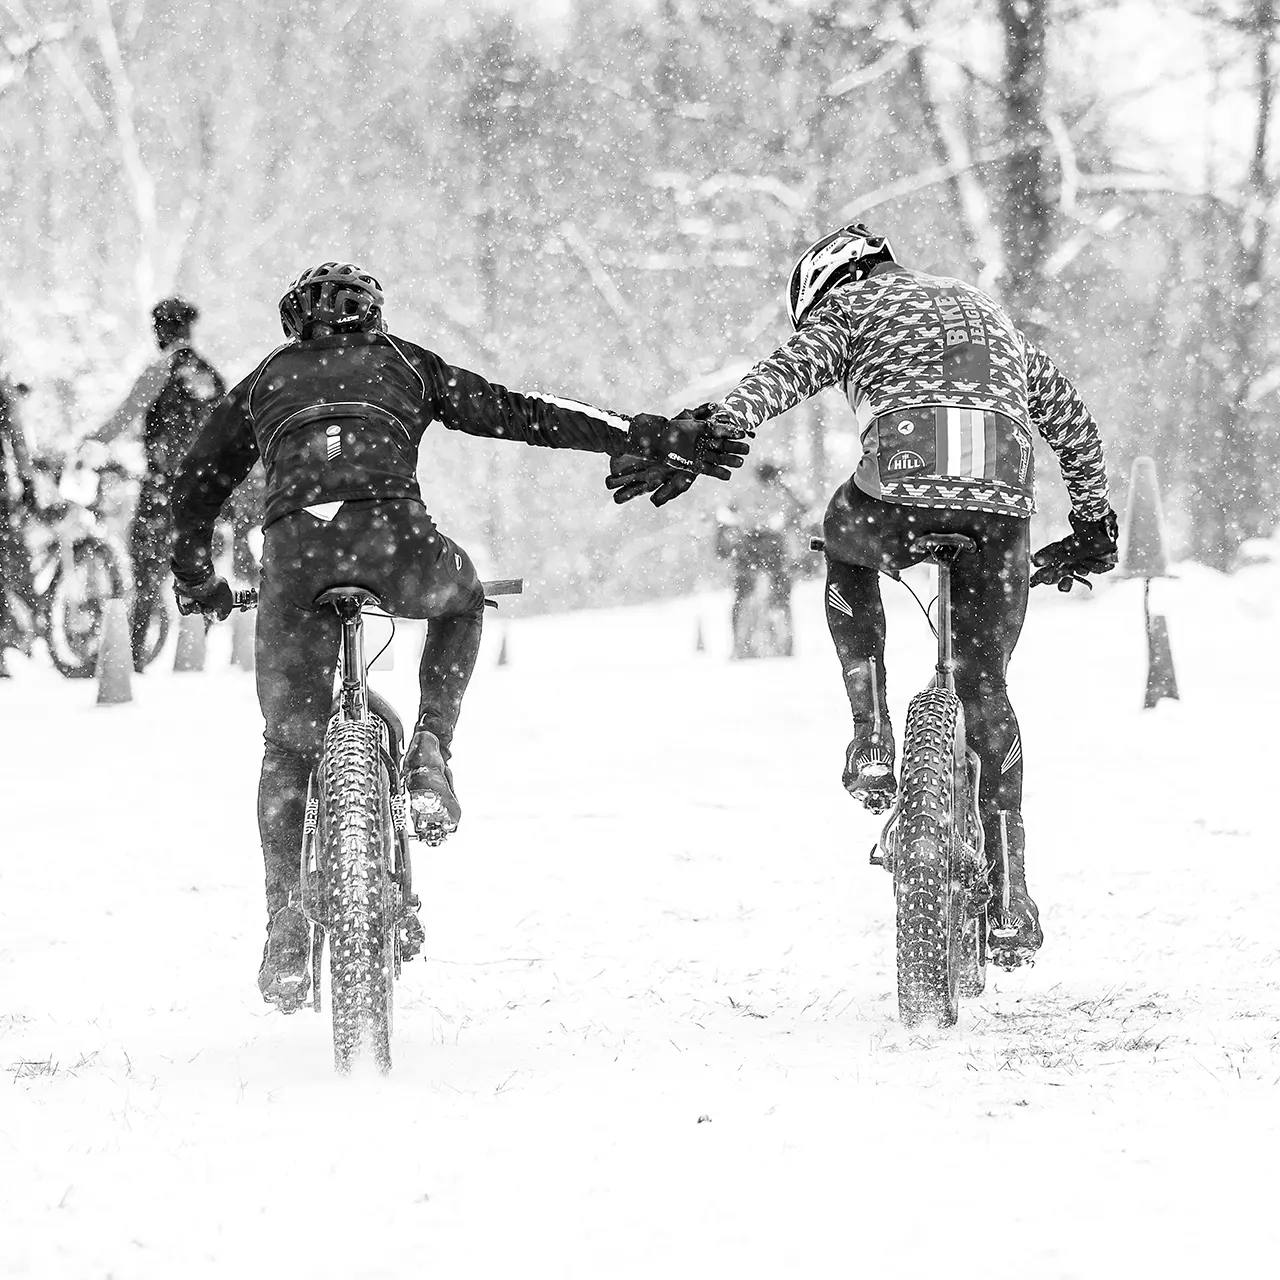 Frosted Fat Tire 25 Mile Relay